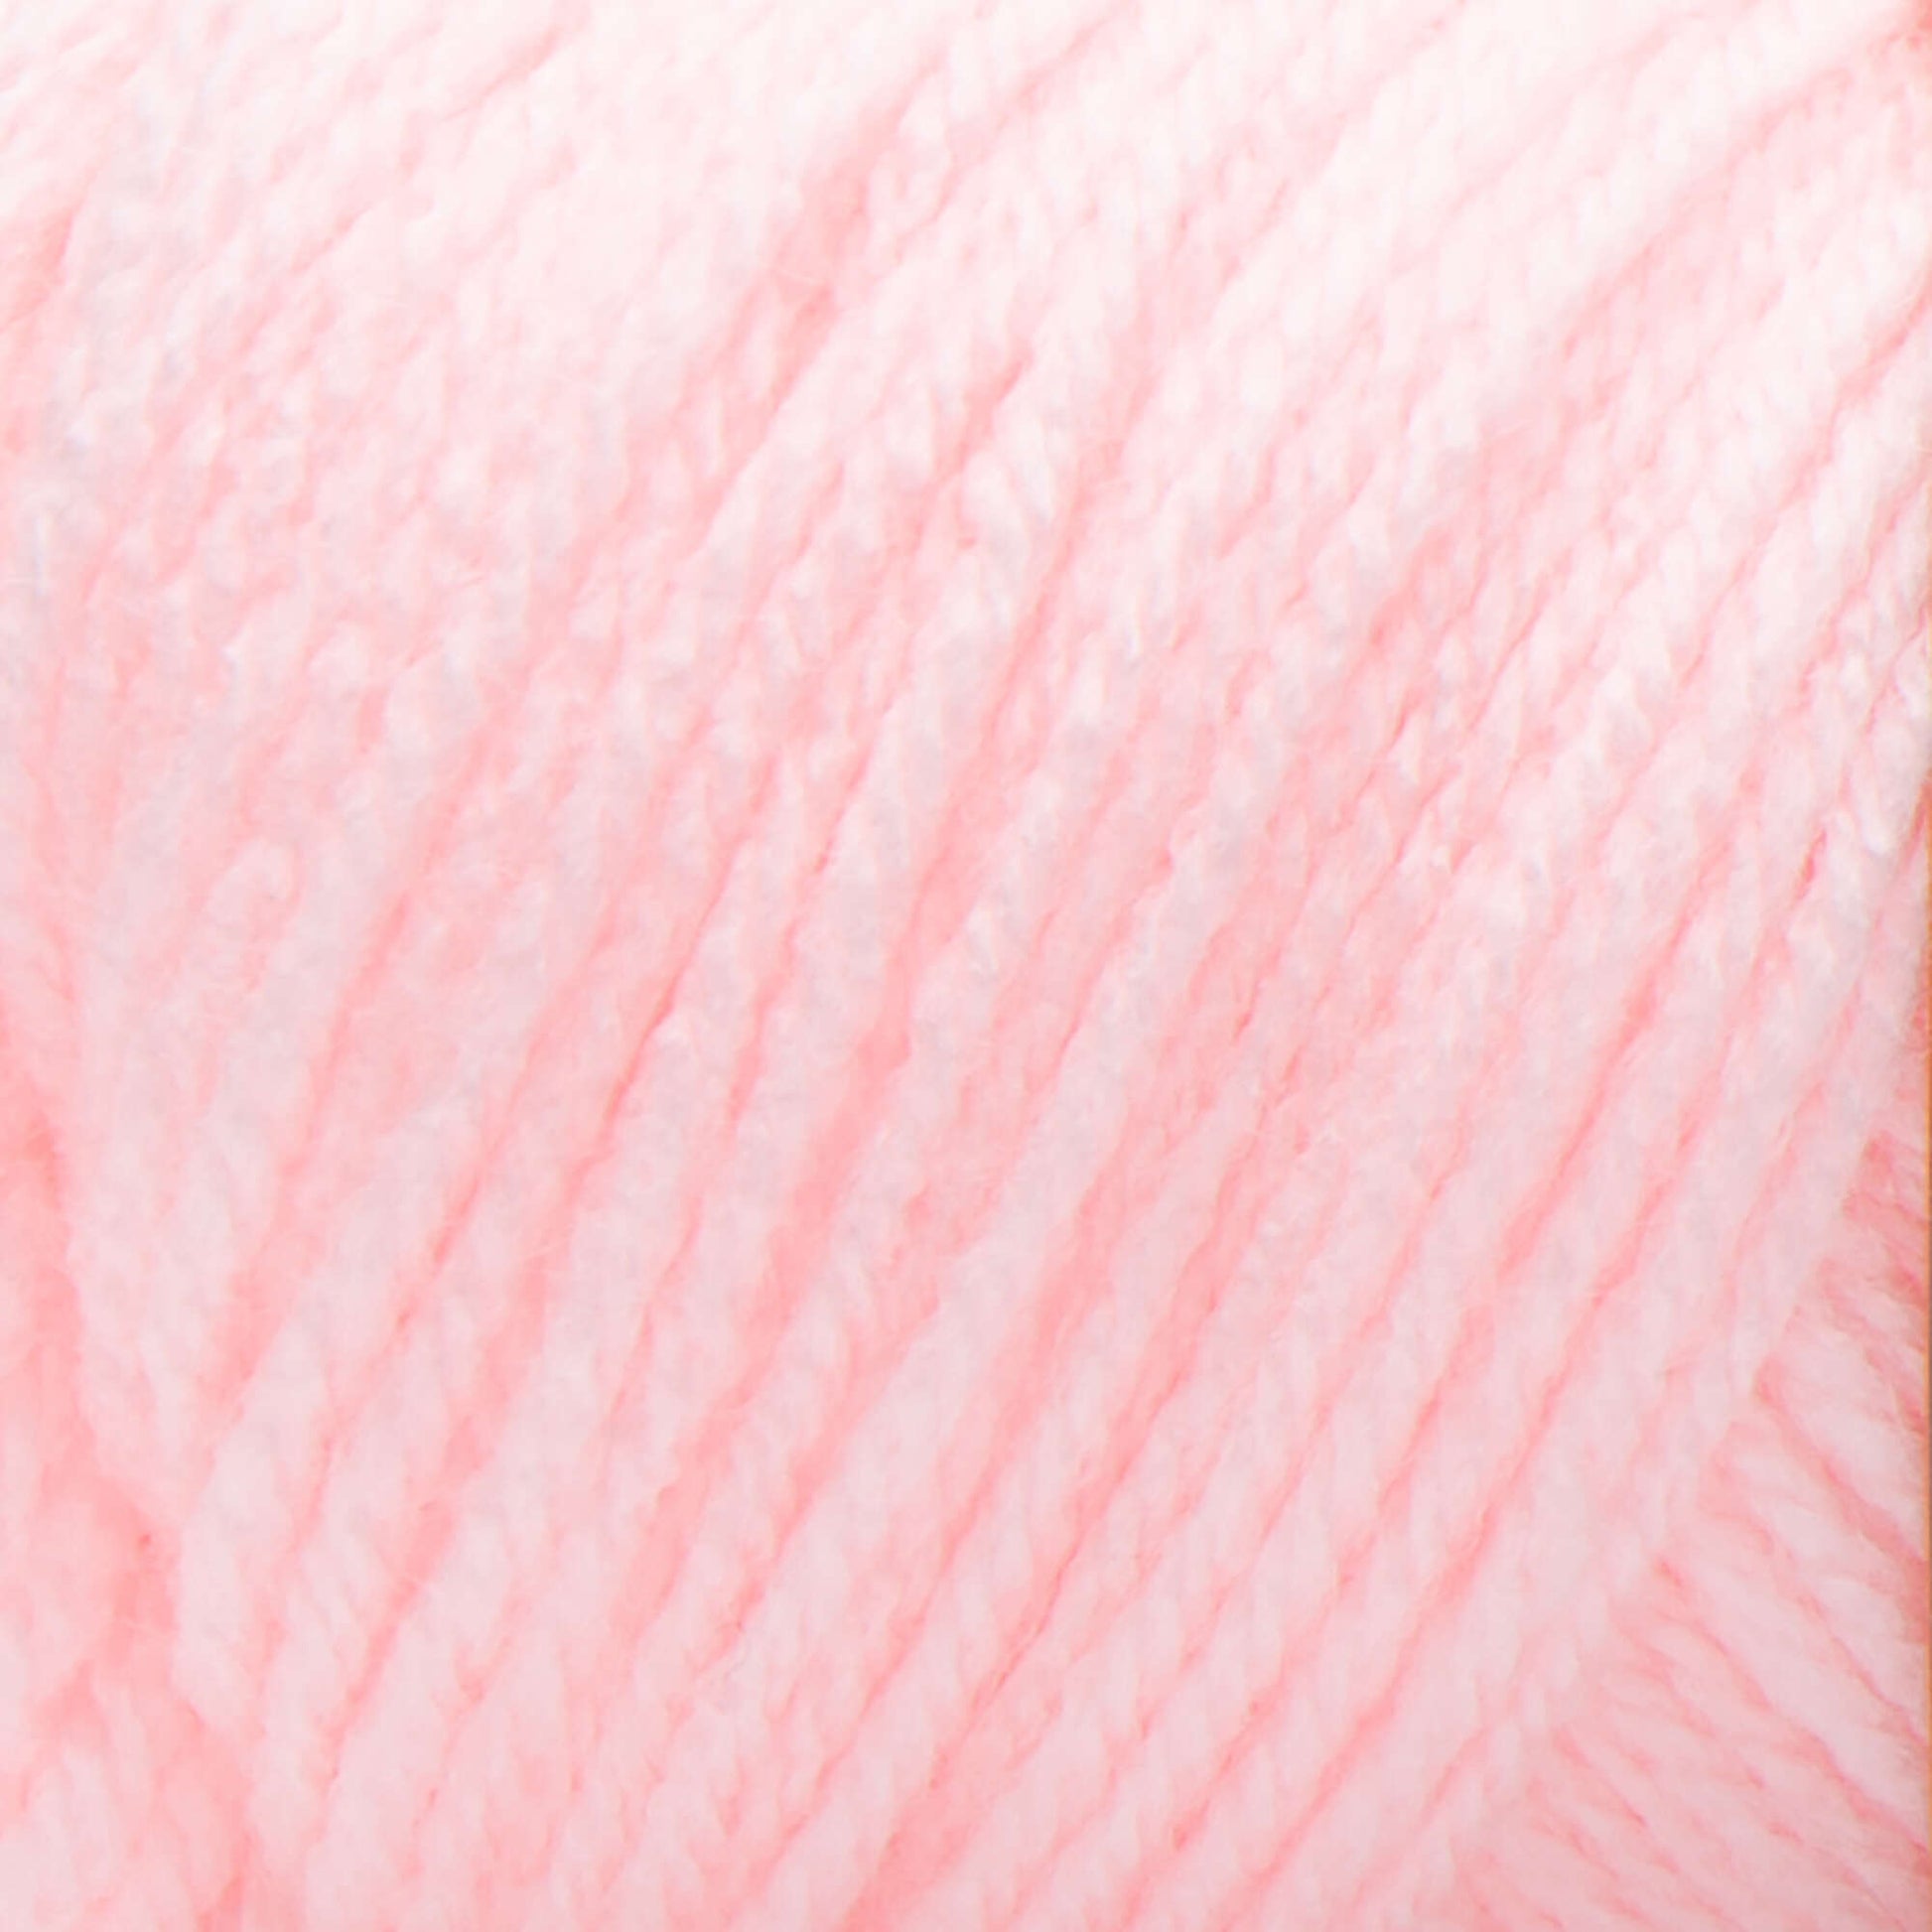 Red Heart Classic Yarn - Clearance shades Lily Pink